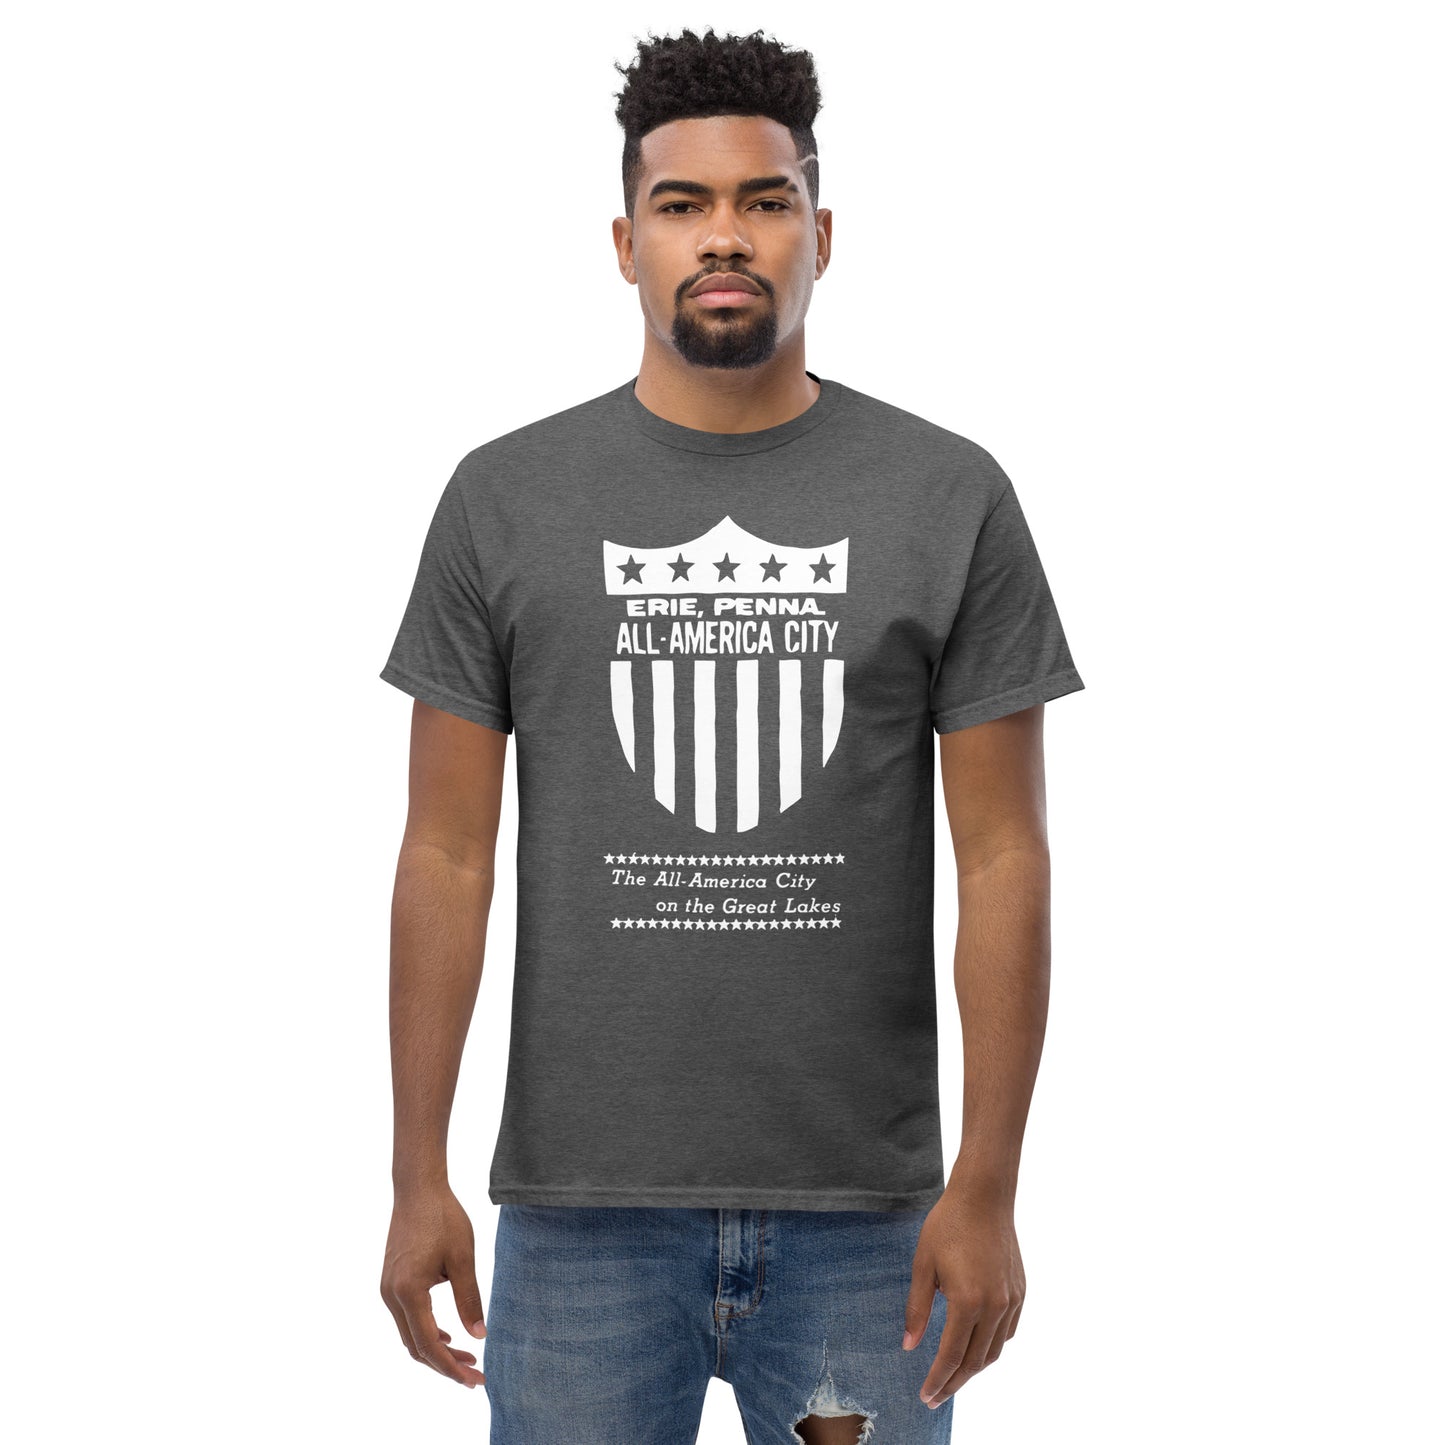 All American Erie Classic Unisex Tee (White)